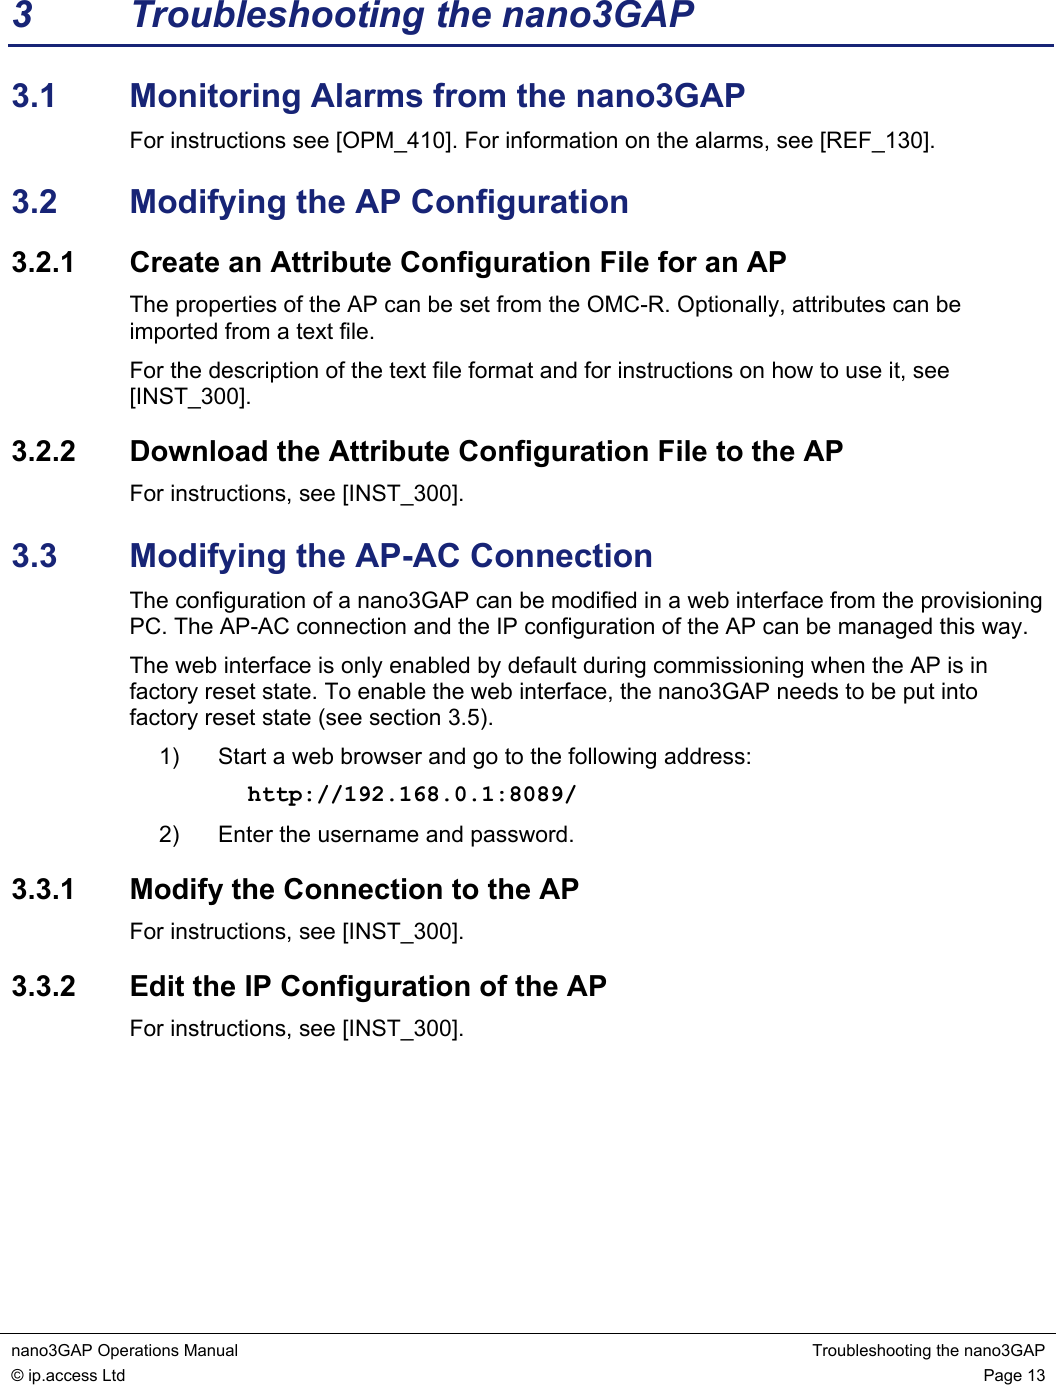 nano3GAP Operations Manual  Troubleshooting the nano3GAP © ip.access Ltd  Page 13  3  Troubleshooting the nano3GAP 3.1  Monitoring Alarms from the nano3GAP For instructions see [OPM_410]. For information on the alarms, see [REF_130]. 3.2  Modifying the AP Configuration 3.2.1  Create an Attribute Configuration File for an AP The properties of the AP can be set from the OMC-R. Optionally, attributes can be imported from a text file. For the description of the text file format and for instructions on how to use it, see [INST_300]. 3.2.2  Download the Attribute Configuration File to the AP For instructions, see [INST_300]. 3.3  Modifying the AP-AC Connection The configuration of a nano3GAP can be modified in a web interface from the provisioning PC. The AP-AC connection and the IP configuration of the AP can be managed this way. The web interface is only enabled by default during commissioning when the AP is in factory reset state. To enable the web interface, the nano3GAP needs to be put into factory reset state (see section 3.5). 1)  Start a web browser and go to the following address: http://192.168.0.1:8089/ 2)  Enter the username and password. 3.3.1  Modify the Connection to the AP For instructions, see [INST_300]. 3.3.2  Edit the IP Configuration of the AP For instructions, see [INST_300].   